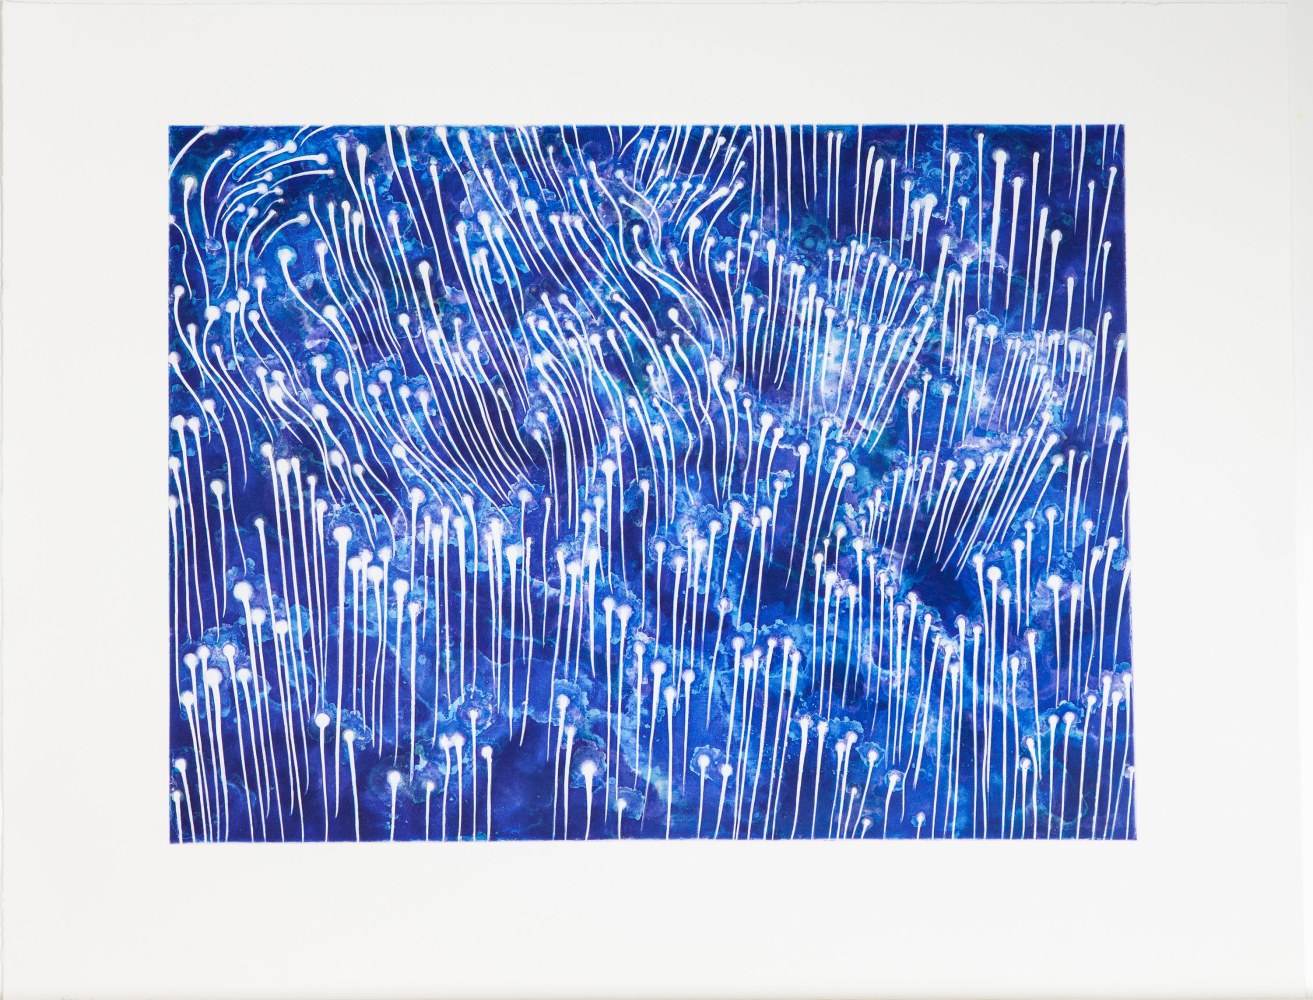 Rising (two blues)
Barbara Takenaga, 2020

Three plate aquatint etching with soap ground and spit bite
Signed, dated and numbered by the artist on recto
Plate size: 18&amp;quot; x 24&amp;quot;
Paper size: 25.5&amp;quot; x 31.5&amp;quot;
Edition of 30 + 5 AP&amp;rsquo;s + 5 PP&amp;rsquo;s
$2,500

Published and printed by Wingate Studio

INQUIRE